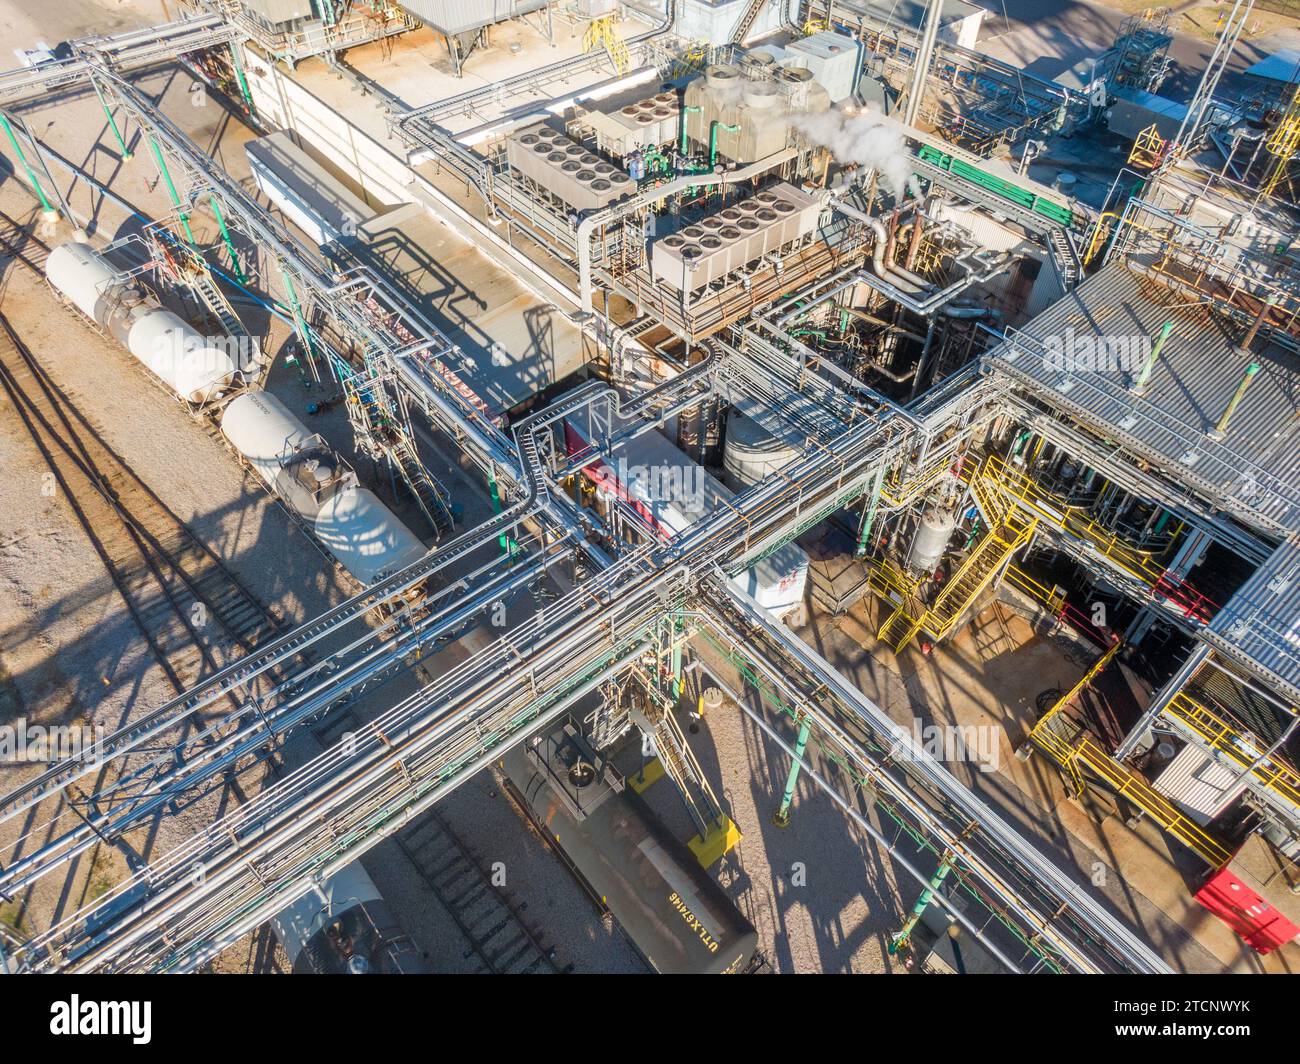 drone images of a large pharmaceutical manufacturing factory with lots of pipes, cool angles, and interesting shadows. Stock Photo